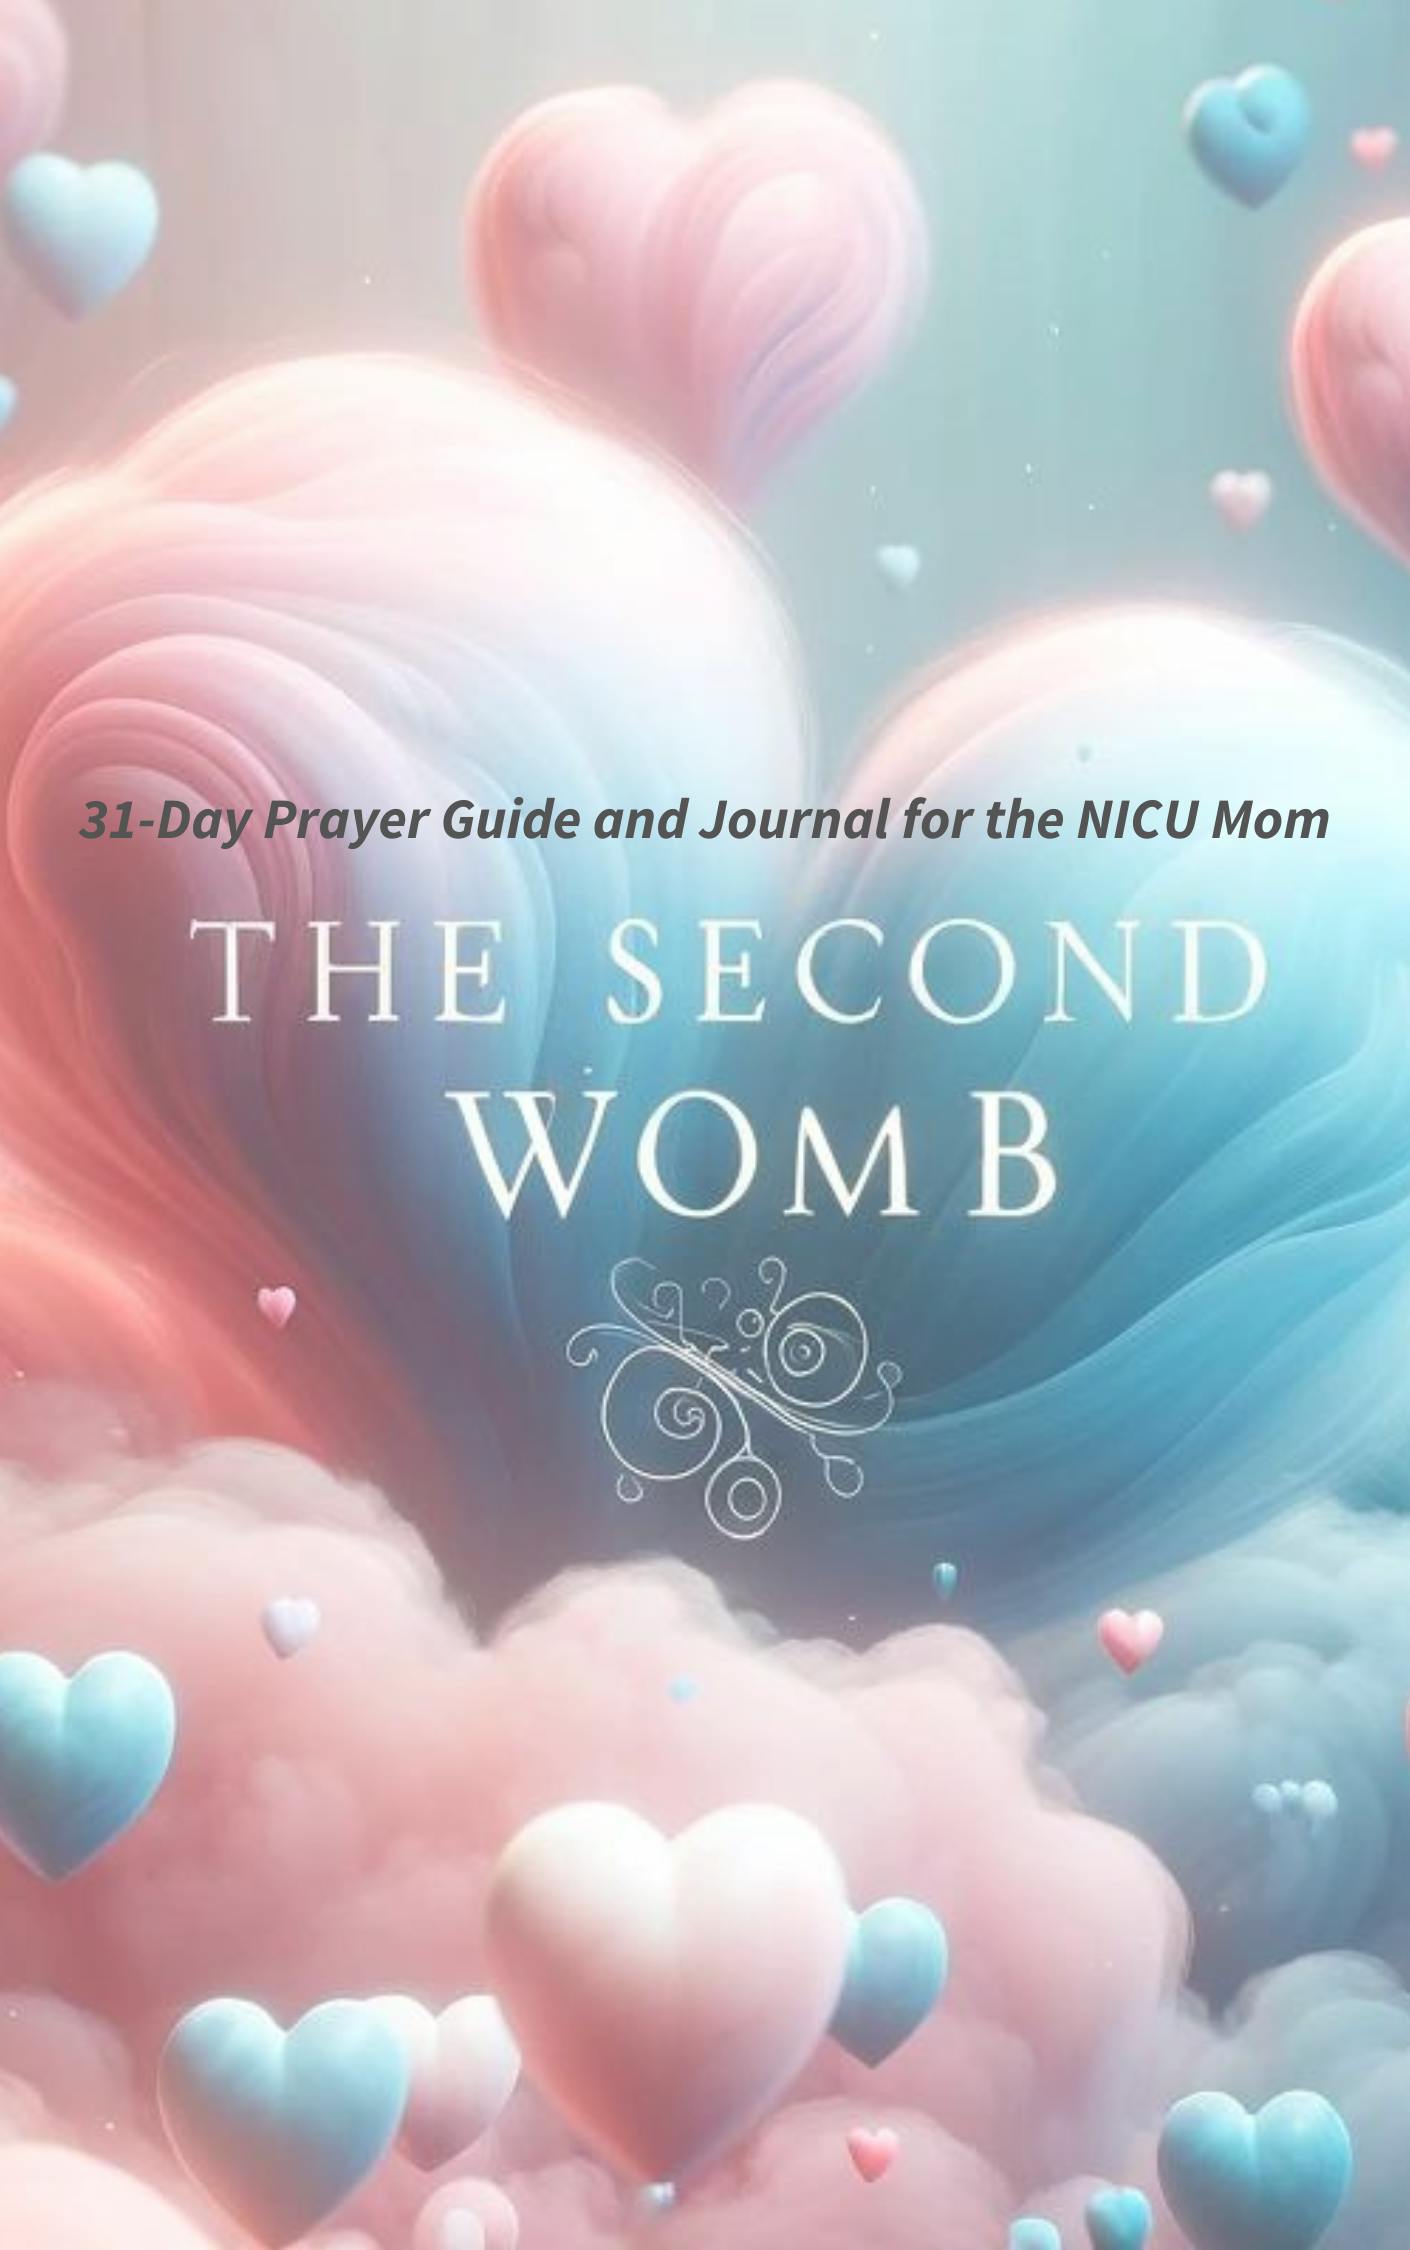 The Second Womb: 31-Day Prayer Guide & Journal for the NICU Mom